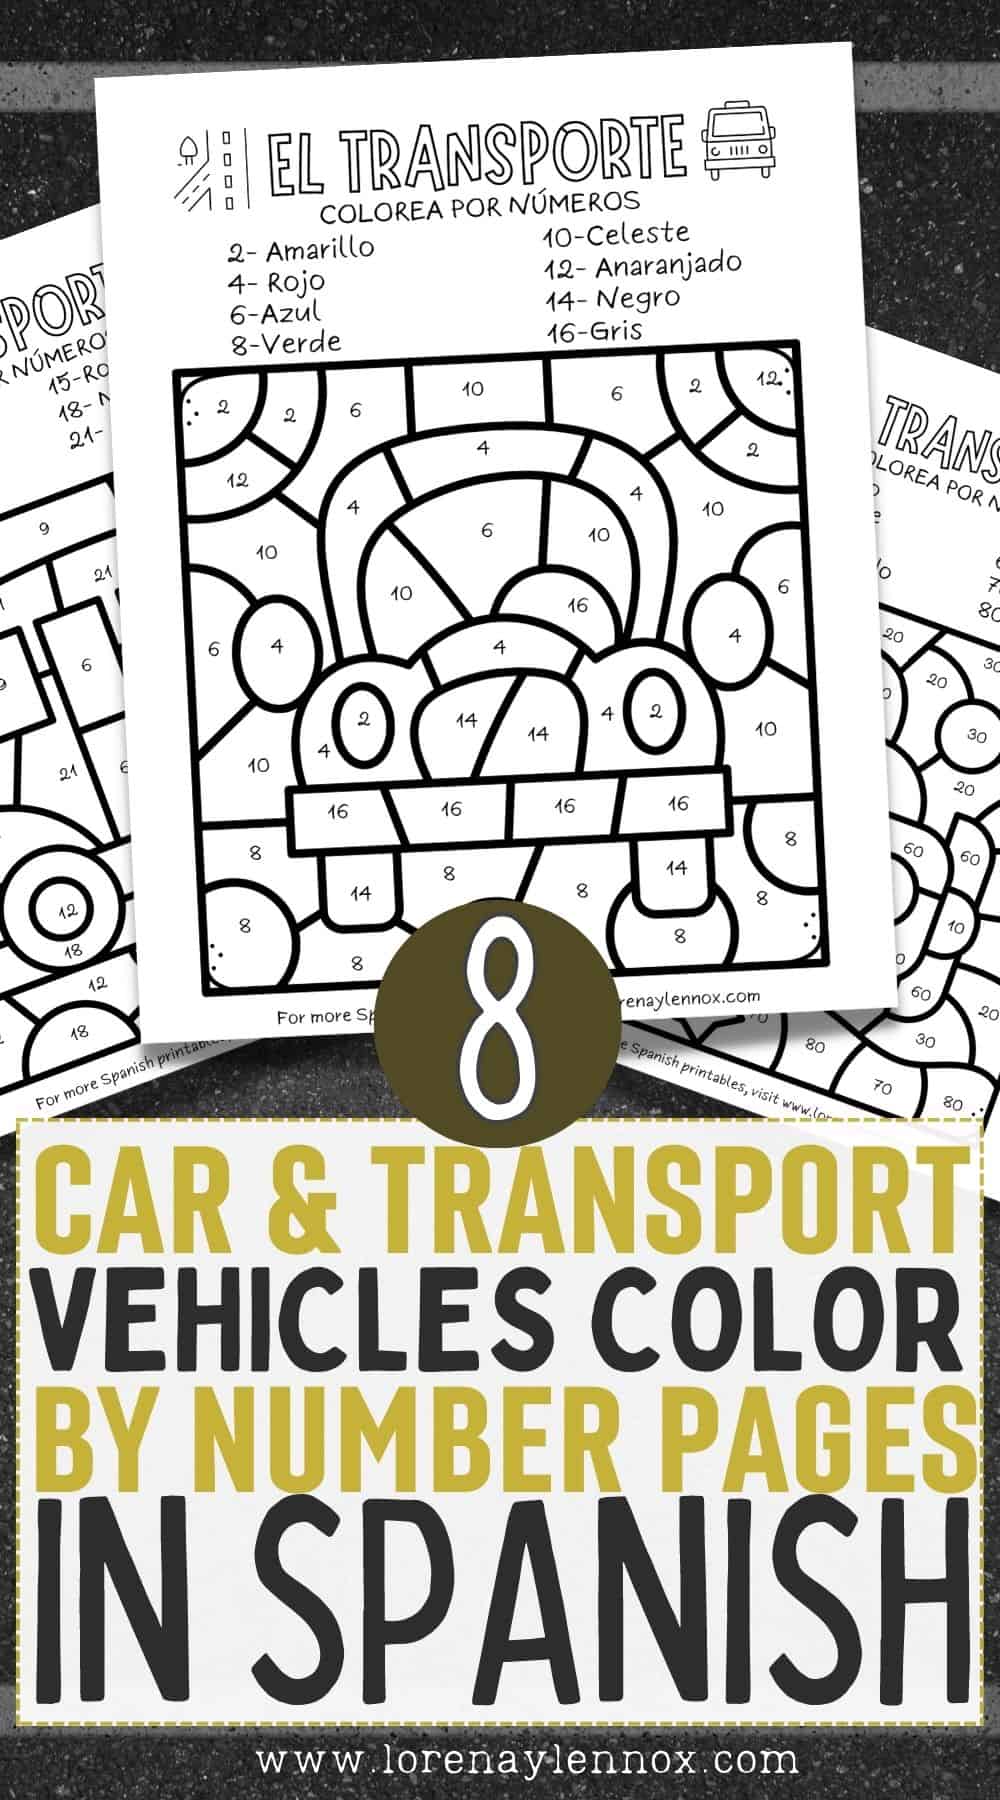 Transportation and Car Color By Numbers in Spanish